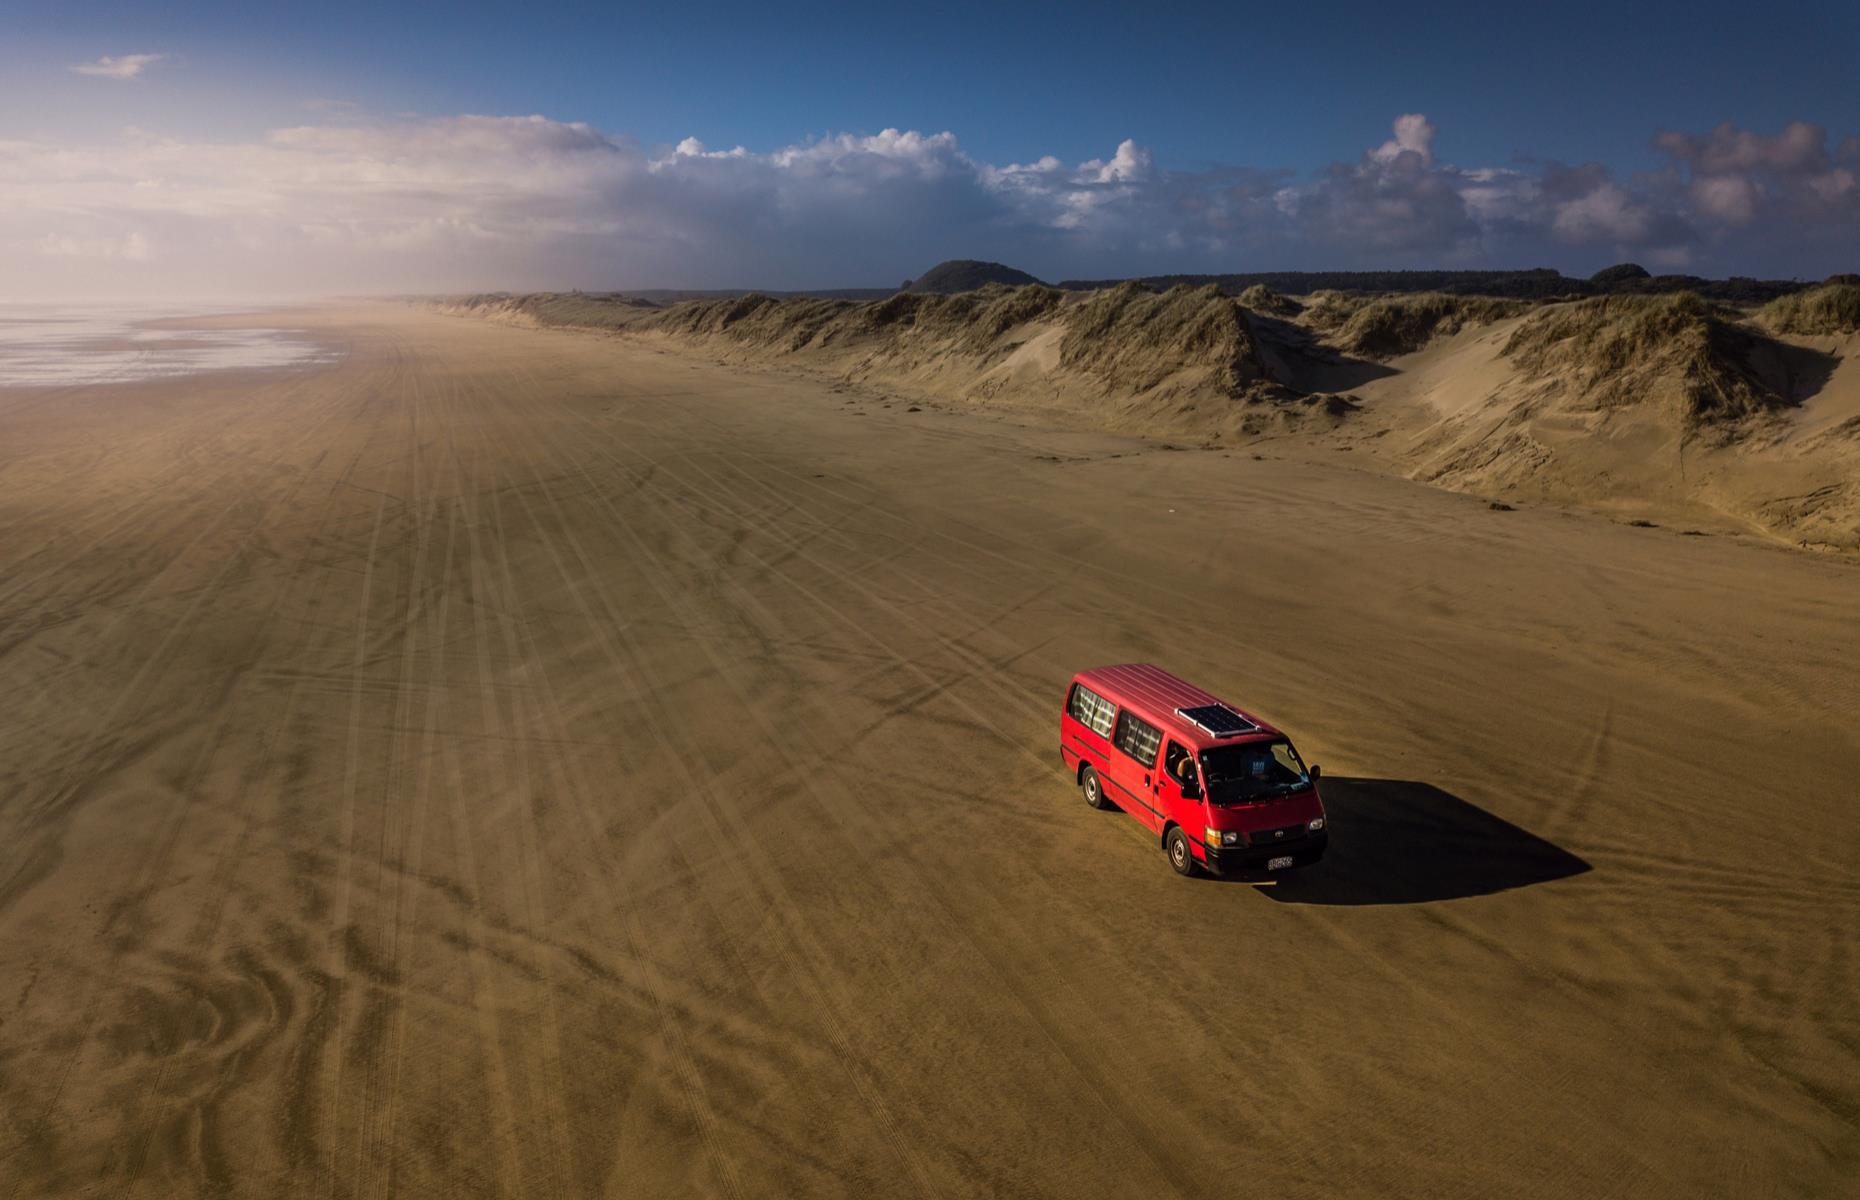 <p>The far north’s Ninety Mile Beach is officially a highway – but one that's only suitable for 4WD vehicles. Beefed-up minibuses regularly run tours up and down the sands from Kaitaia to Scott Point, while more adventurous travelers tackle the sands in their own vehicles (though rental motors don't allow you to drive on the beach). A seemingly never-ending stretch of sand, Ninety Mile Beach, which is actually 55 miles (88.5km) long, is famed for spectacular sunsets and one of the best left-hand surf breaks in the world.</p>